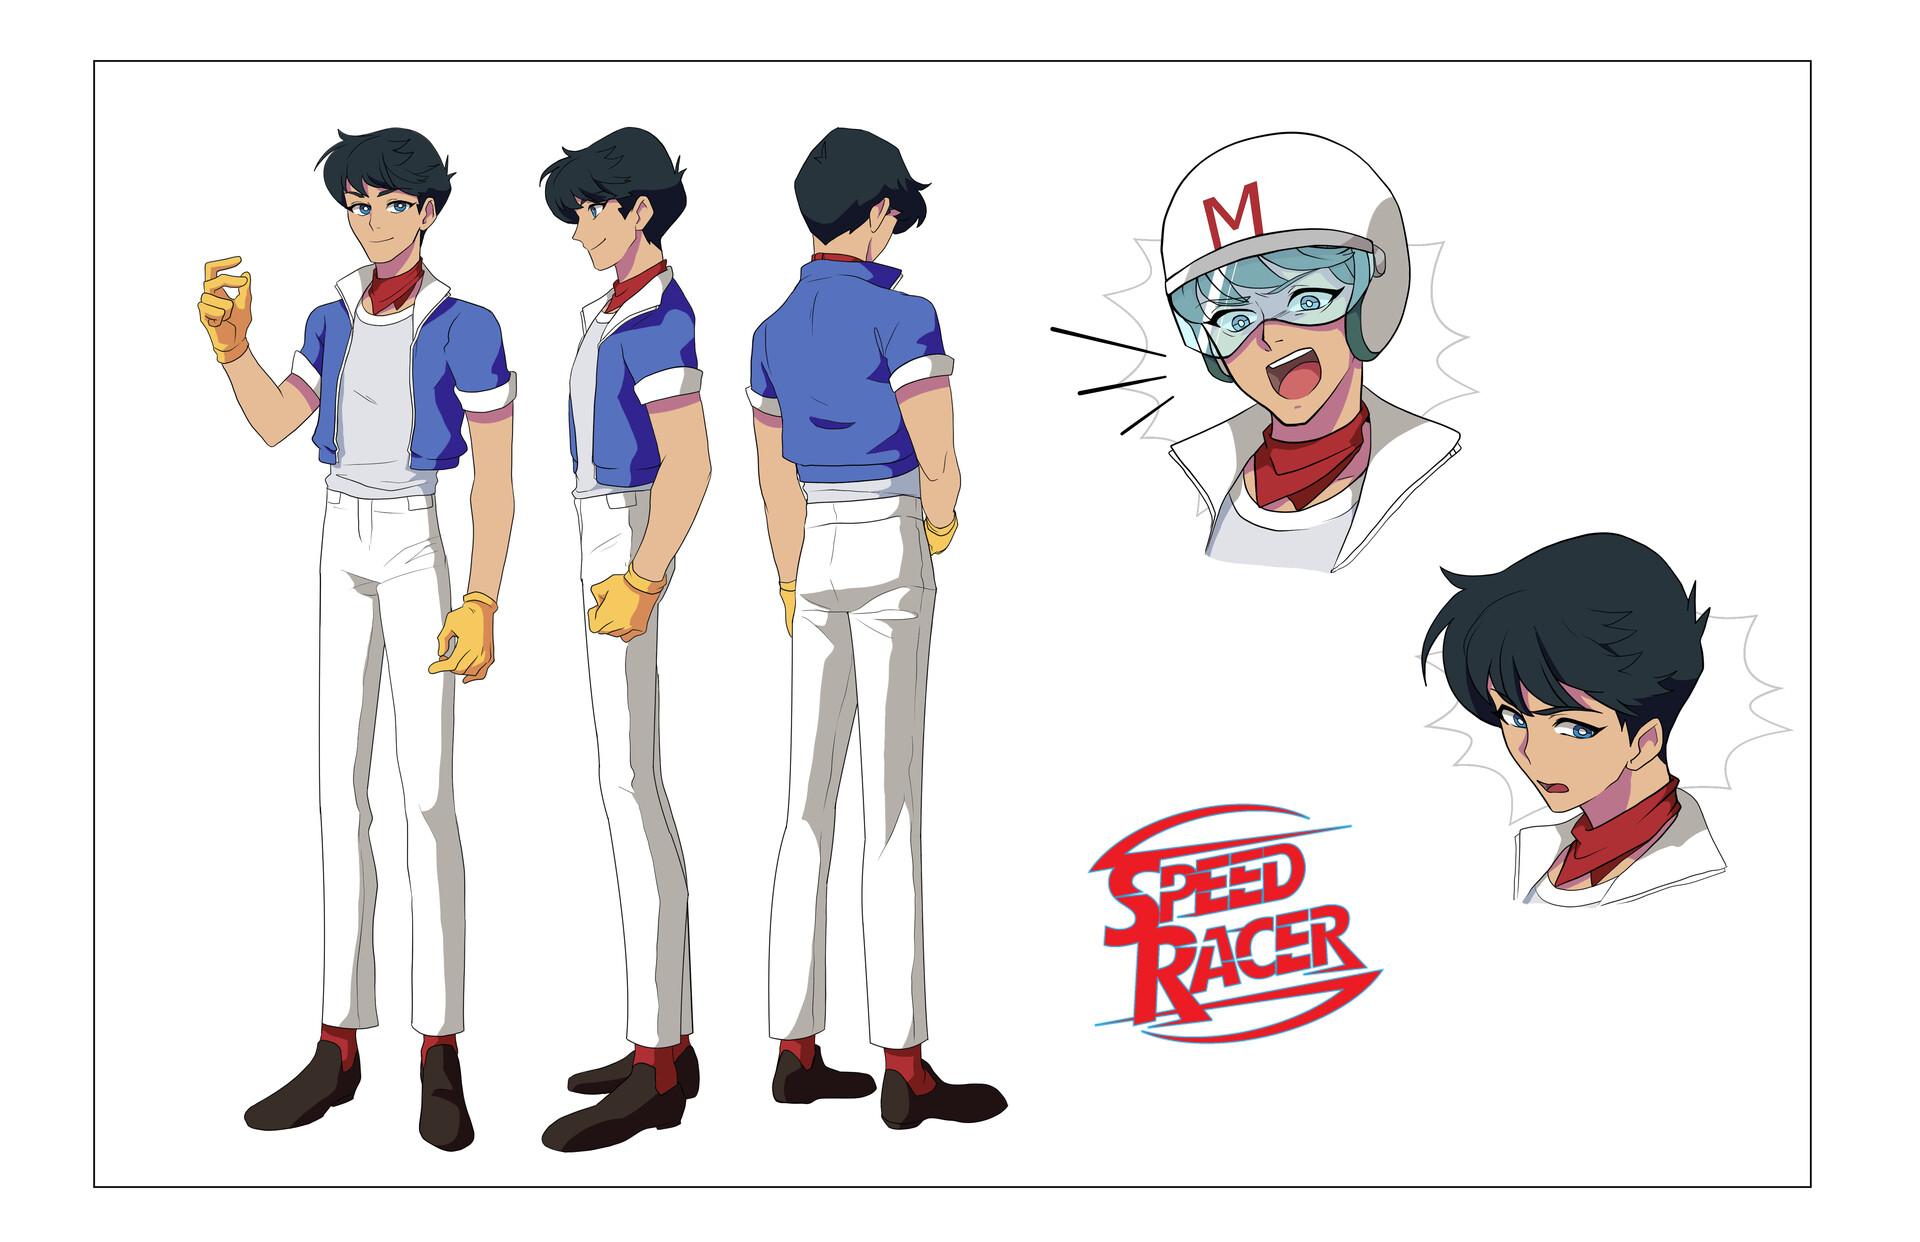 Apple TVs Speed Racer  What We Know So Far